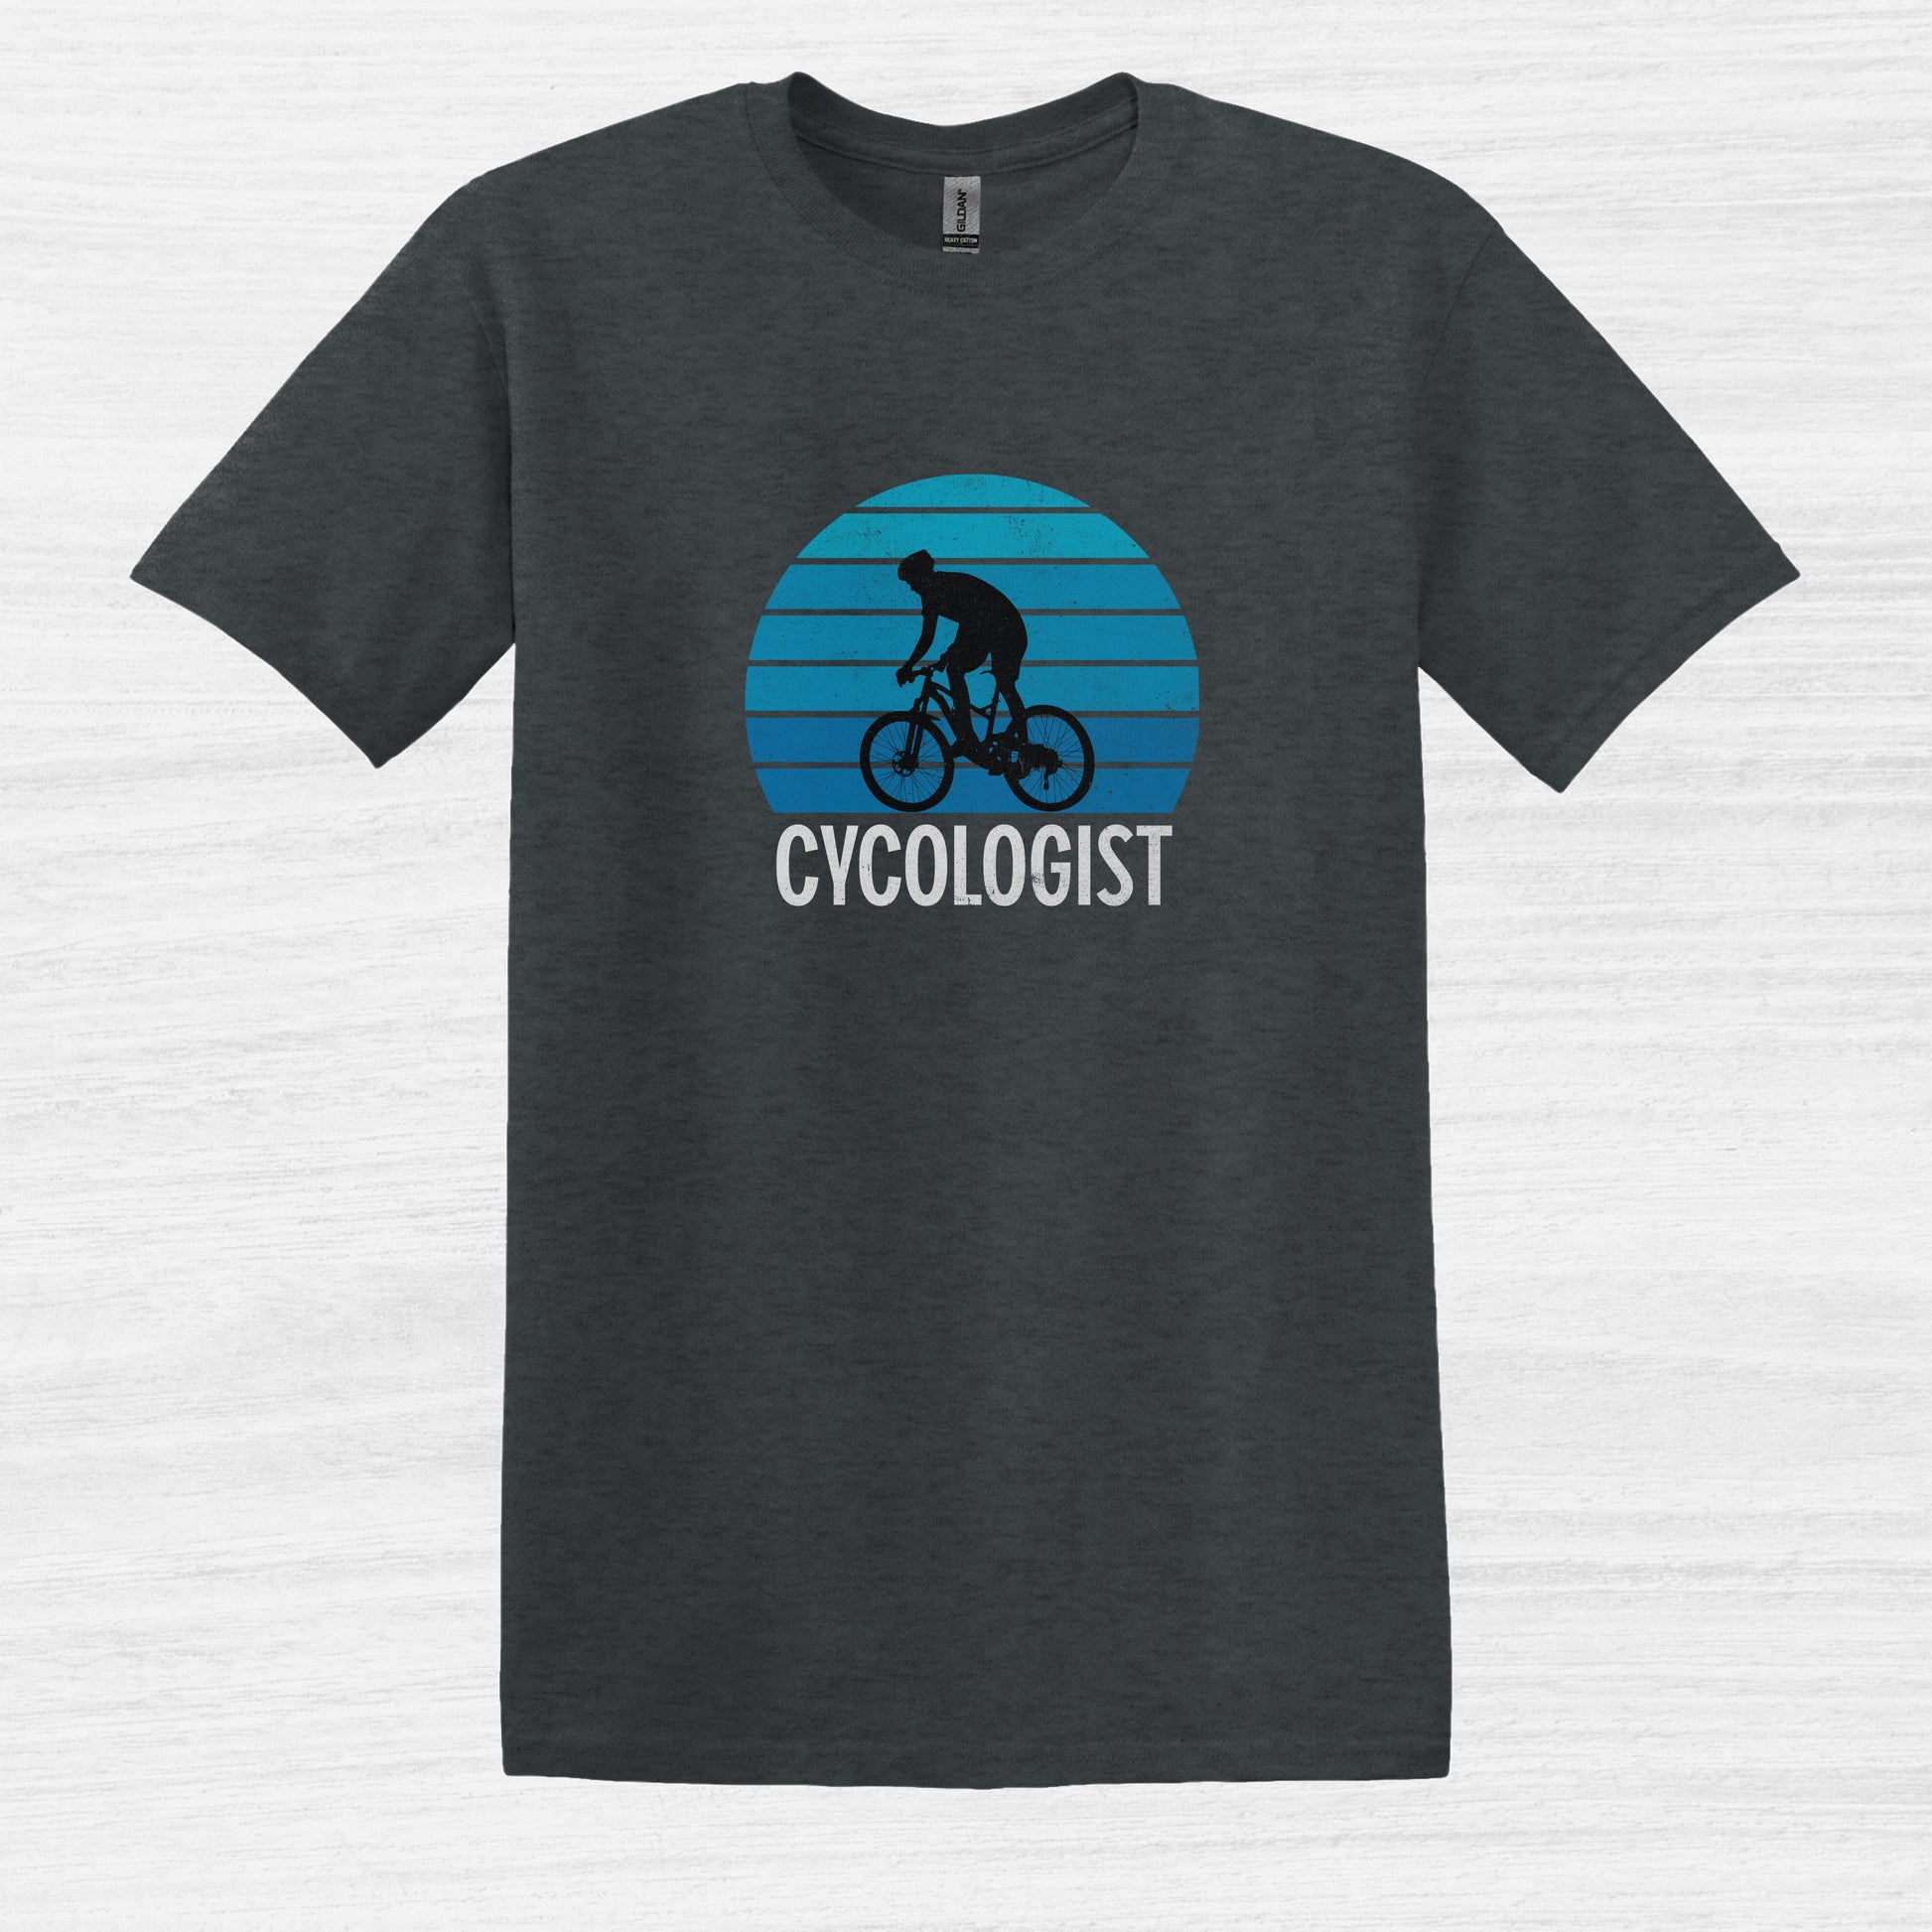 Bike Bliss Cycologist Bicycle T-Shirt for Men Vintage Style Dark Heather 2